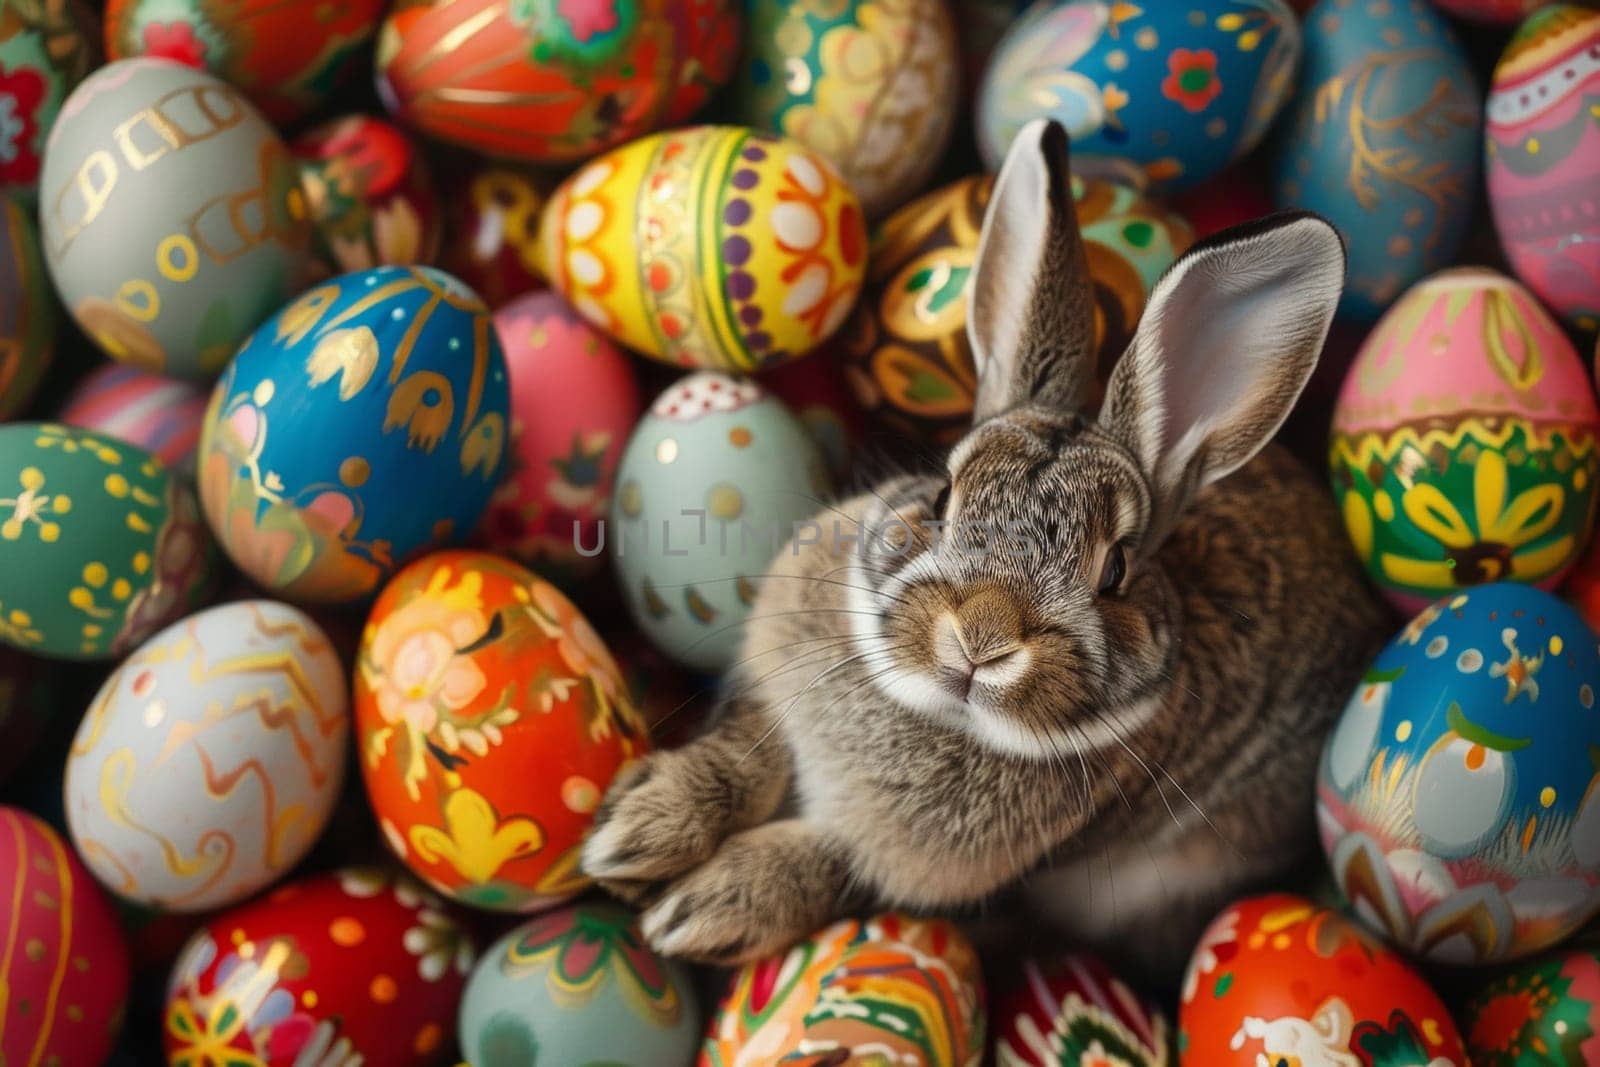 A rabbit is sitting in a pile of colorful Easter eggs. The eggs are of various colors and sizes, and the rabbit is surrounded by them. Concept of playfulness and joy